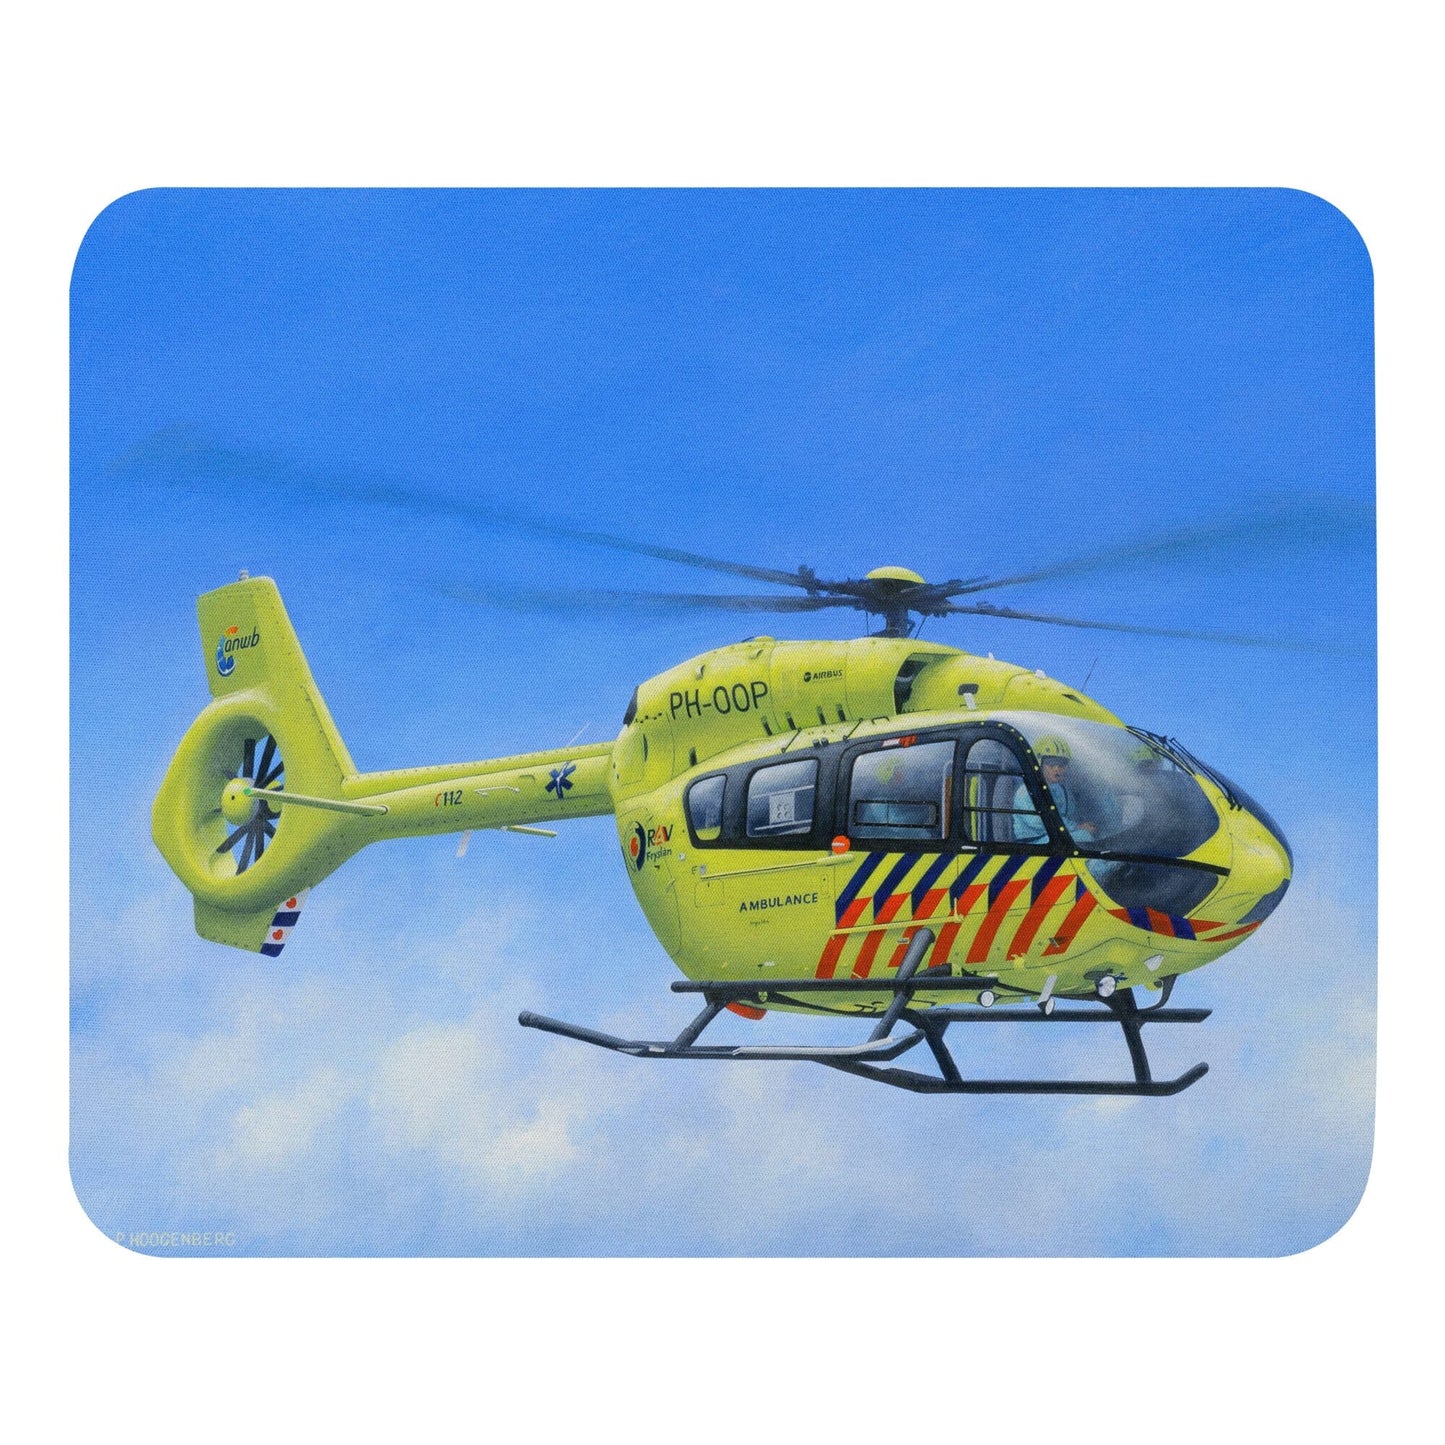 Peter Hoogenberg - Mouse Pad - ANWB Helicopter Wadden Islands Mouse Pads TP Aviation Art 